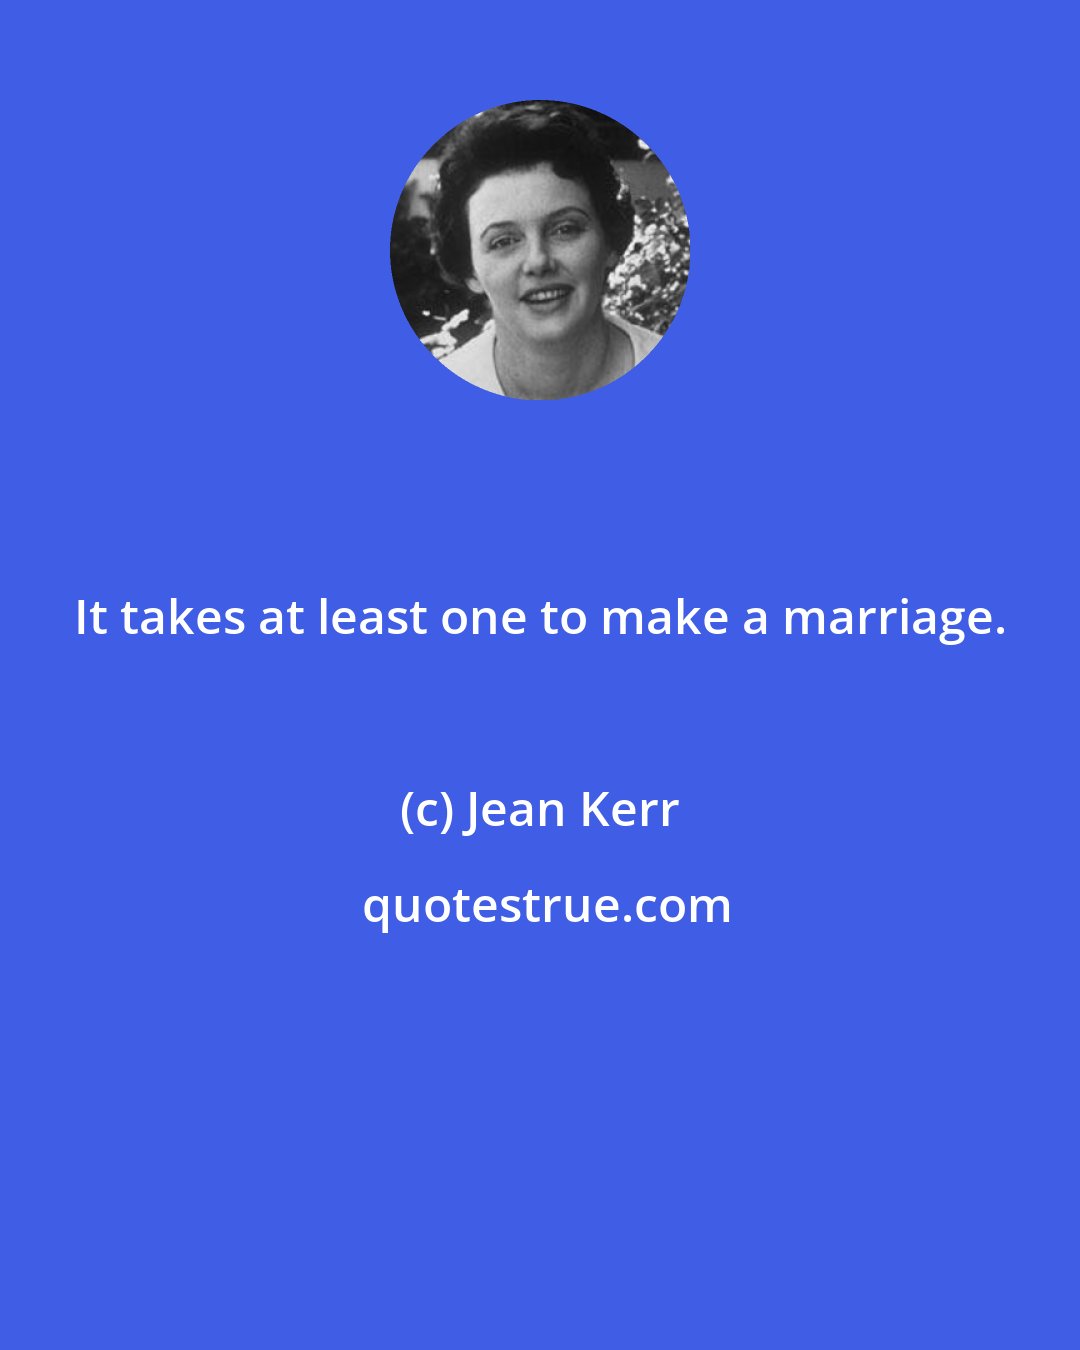 Jean Kerr: It takes at least one to make a marriage.